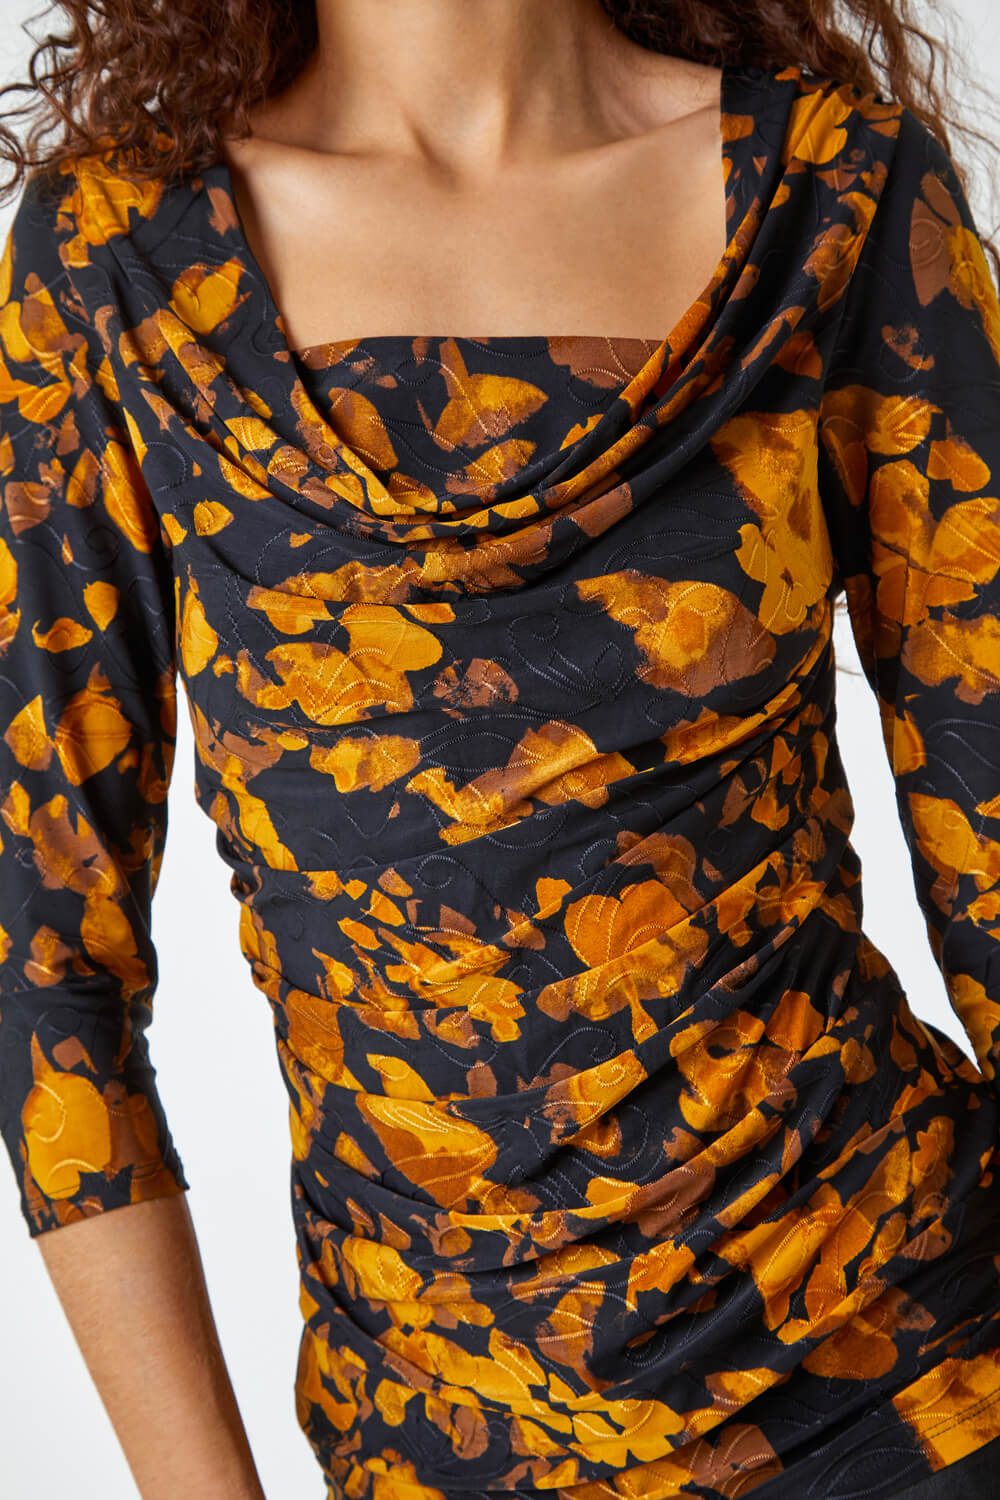 Ochre Floral Print Cowl Neck Top, Image 5 of 5